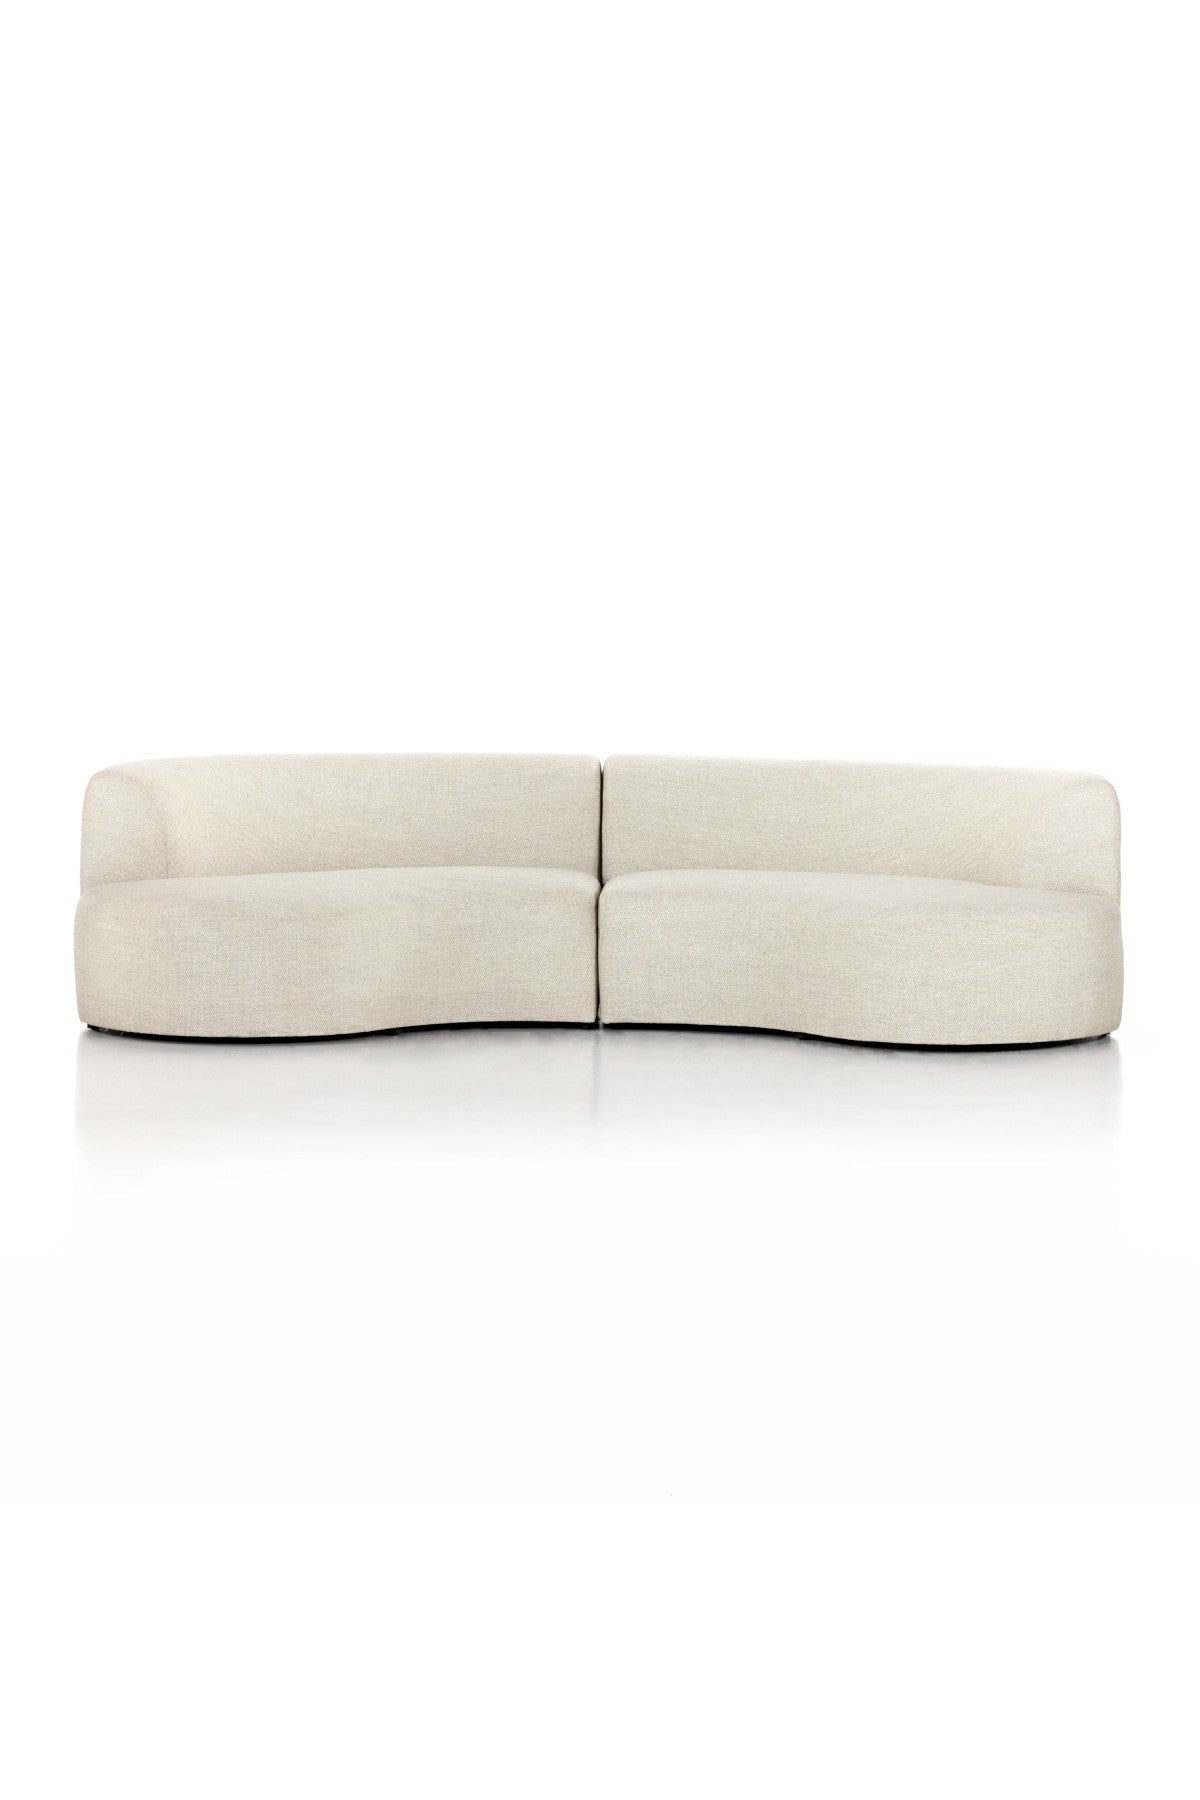 Parma Outdoor 2-Piece Sectional